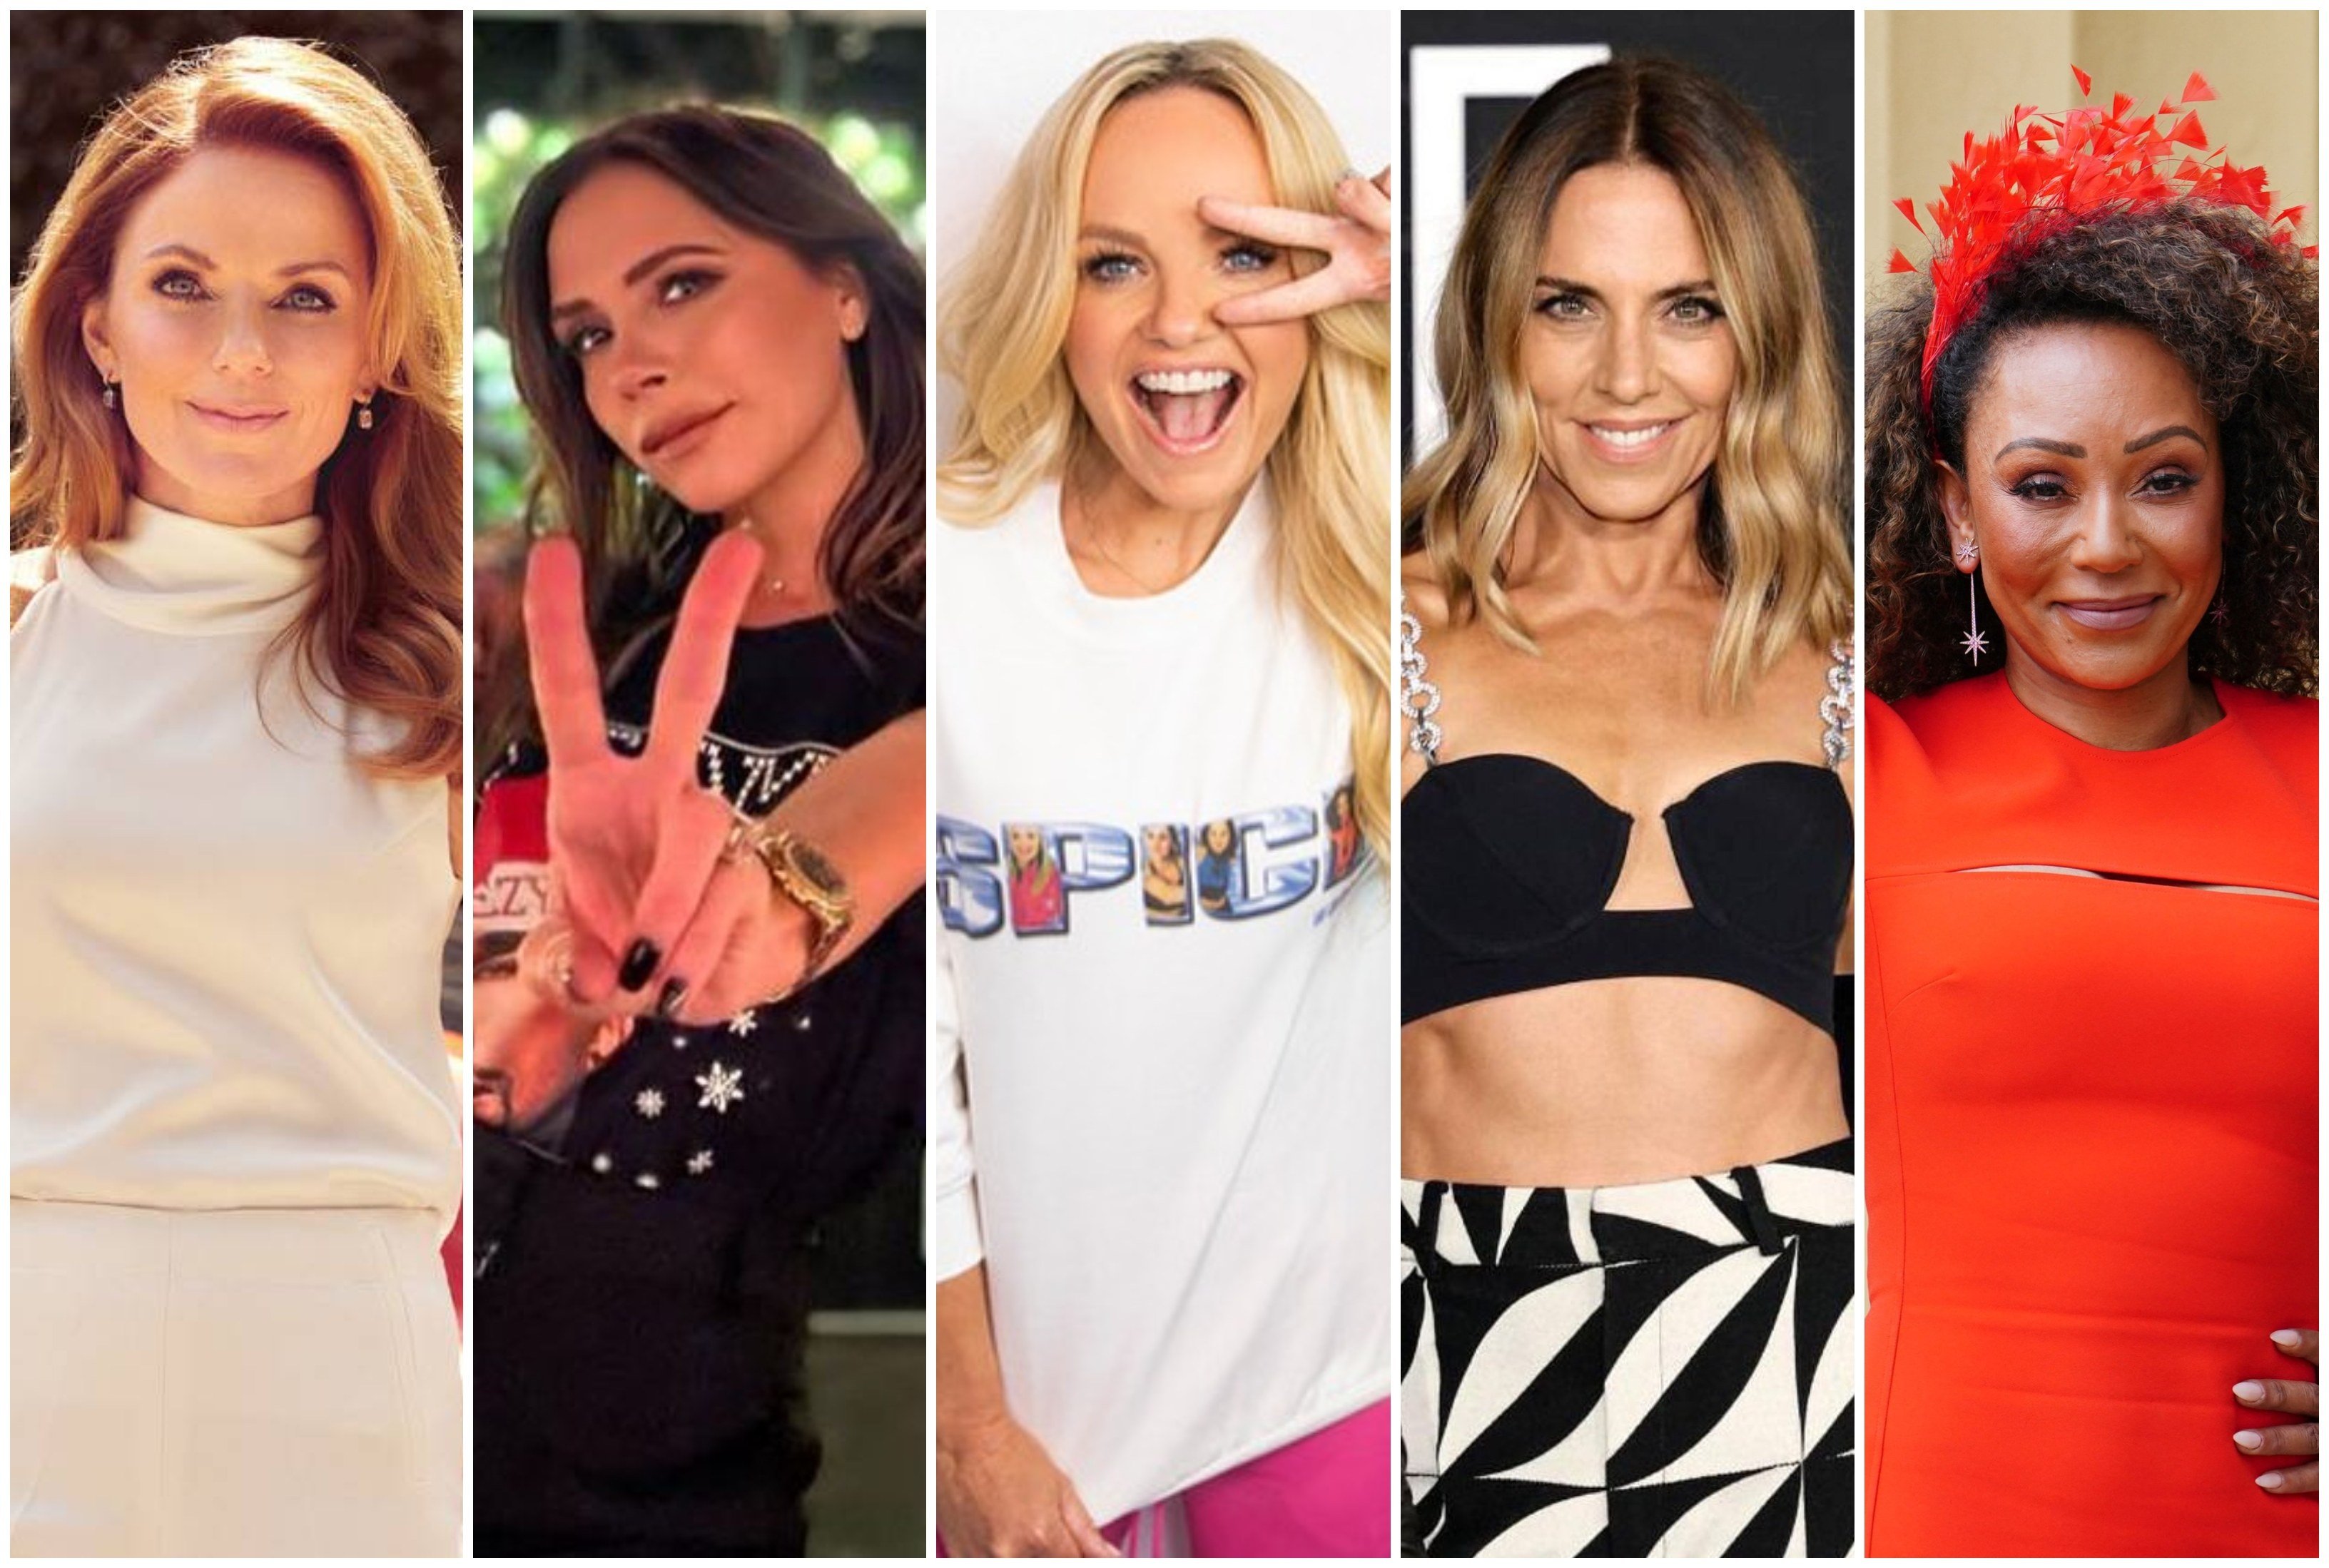 The Spice Girls’ Mel B, Emma Bunton, Victoria Beckham, Melanie C and Geri Horner have all carved successful careers for themselves. Photos: @emmaleebunton, @victoriabeckham, @melaniecmusic/Instagram, Aston Martin, AFP